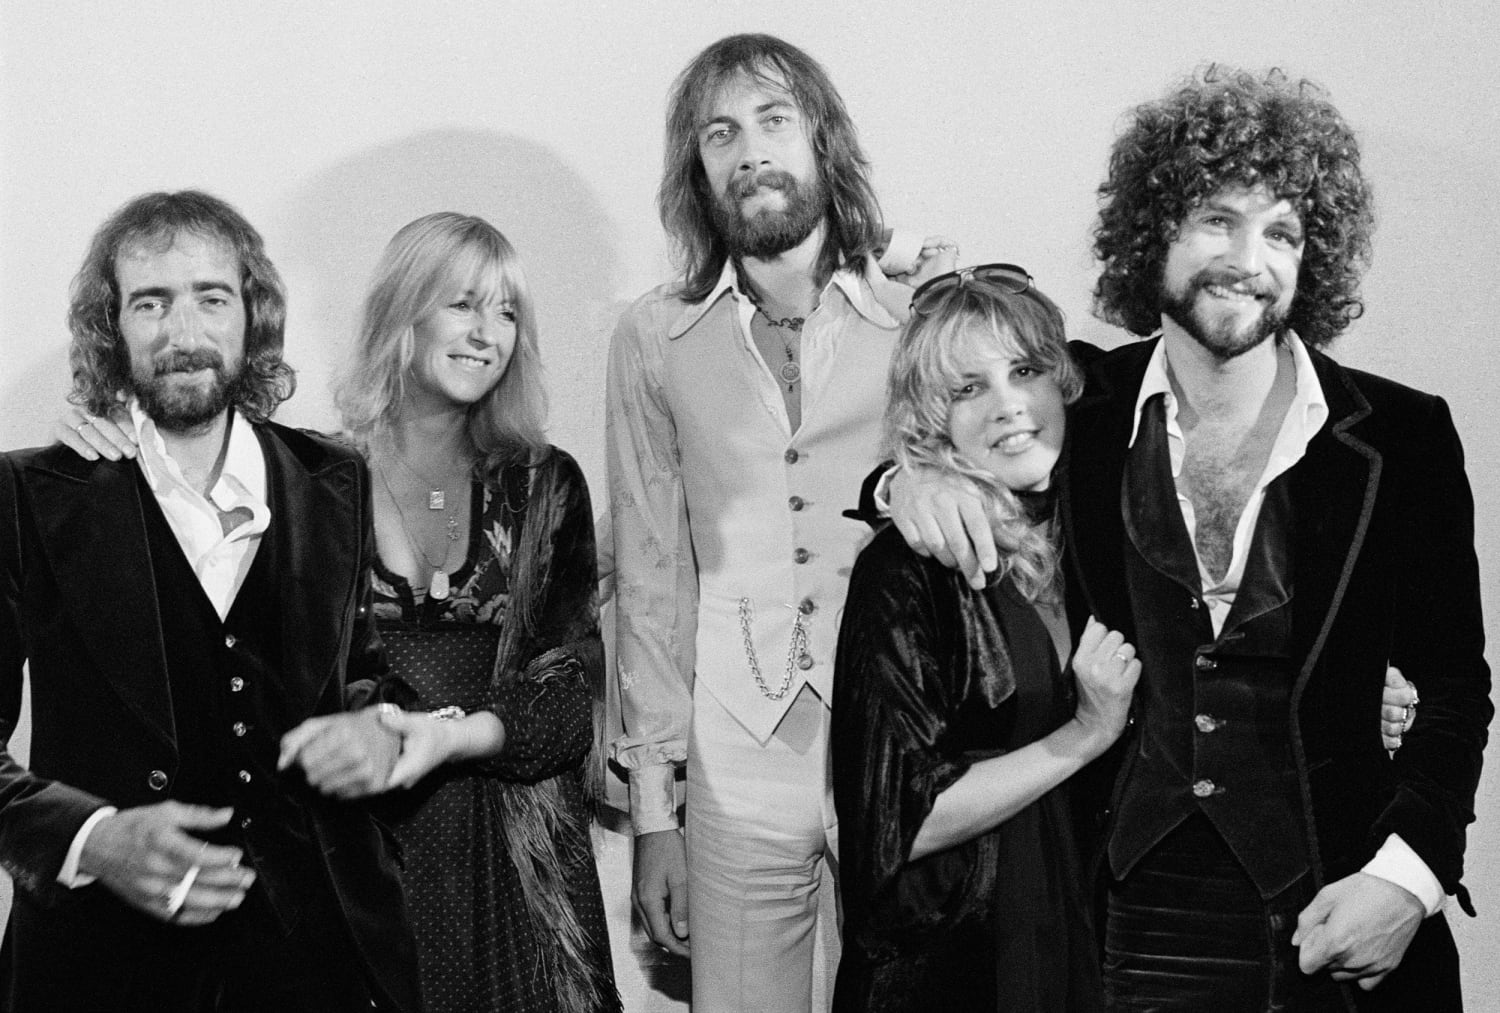 Stevie Nicks Says 'Daisy Jones & the Six' Was Like Watching Her Own Story